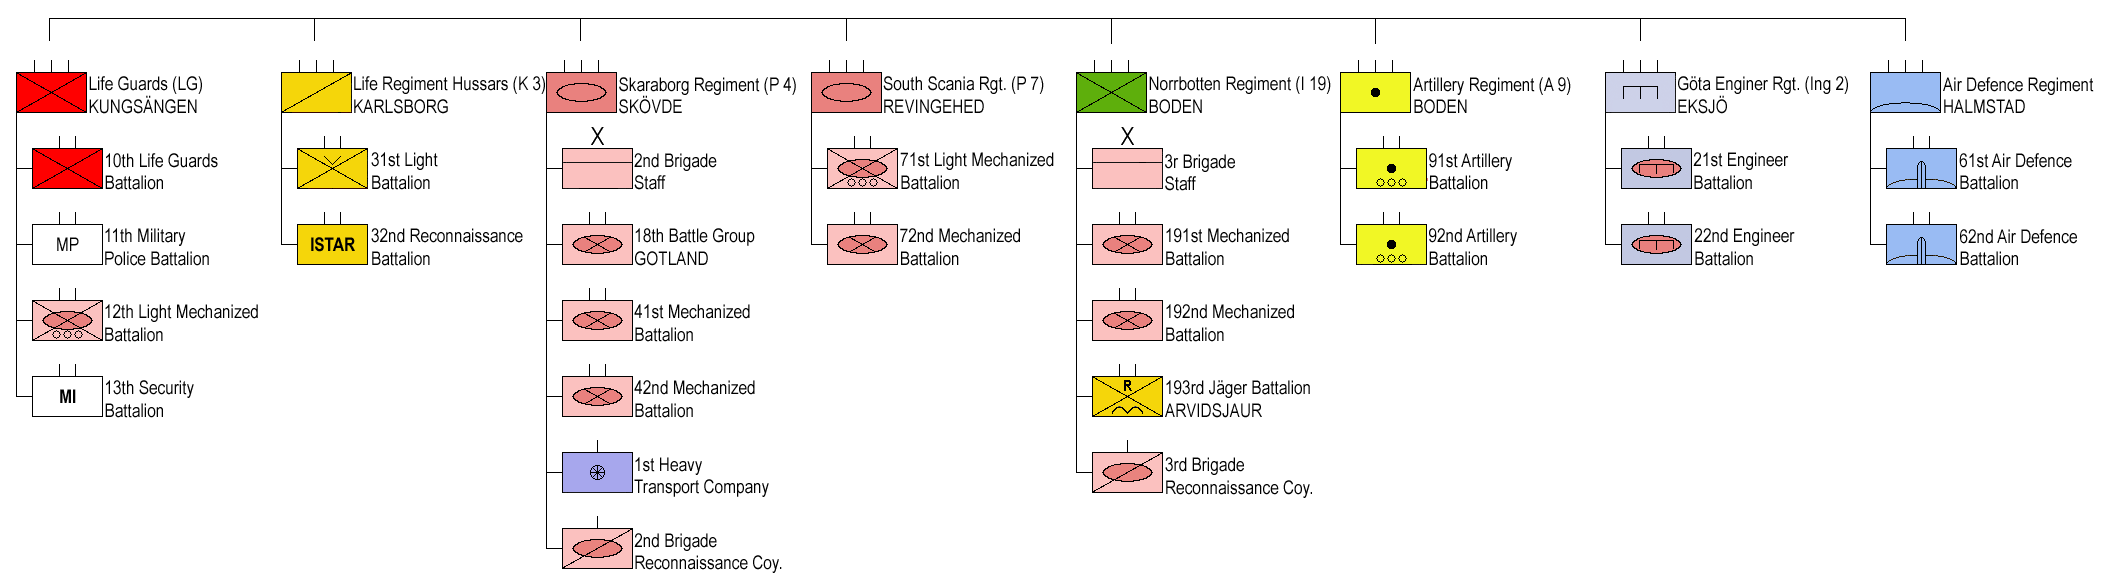 Swedish_Army_Rapid_Reaction_Organisation_Units.png